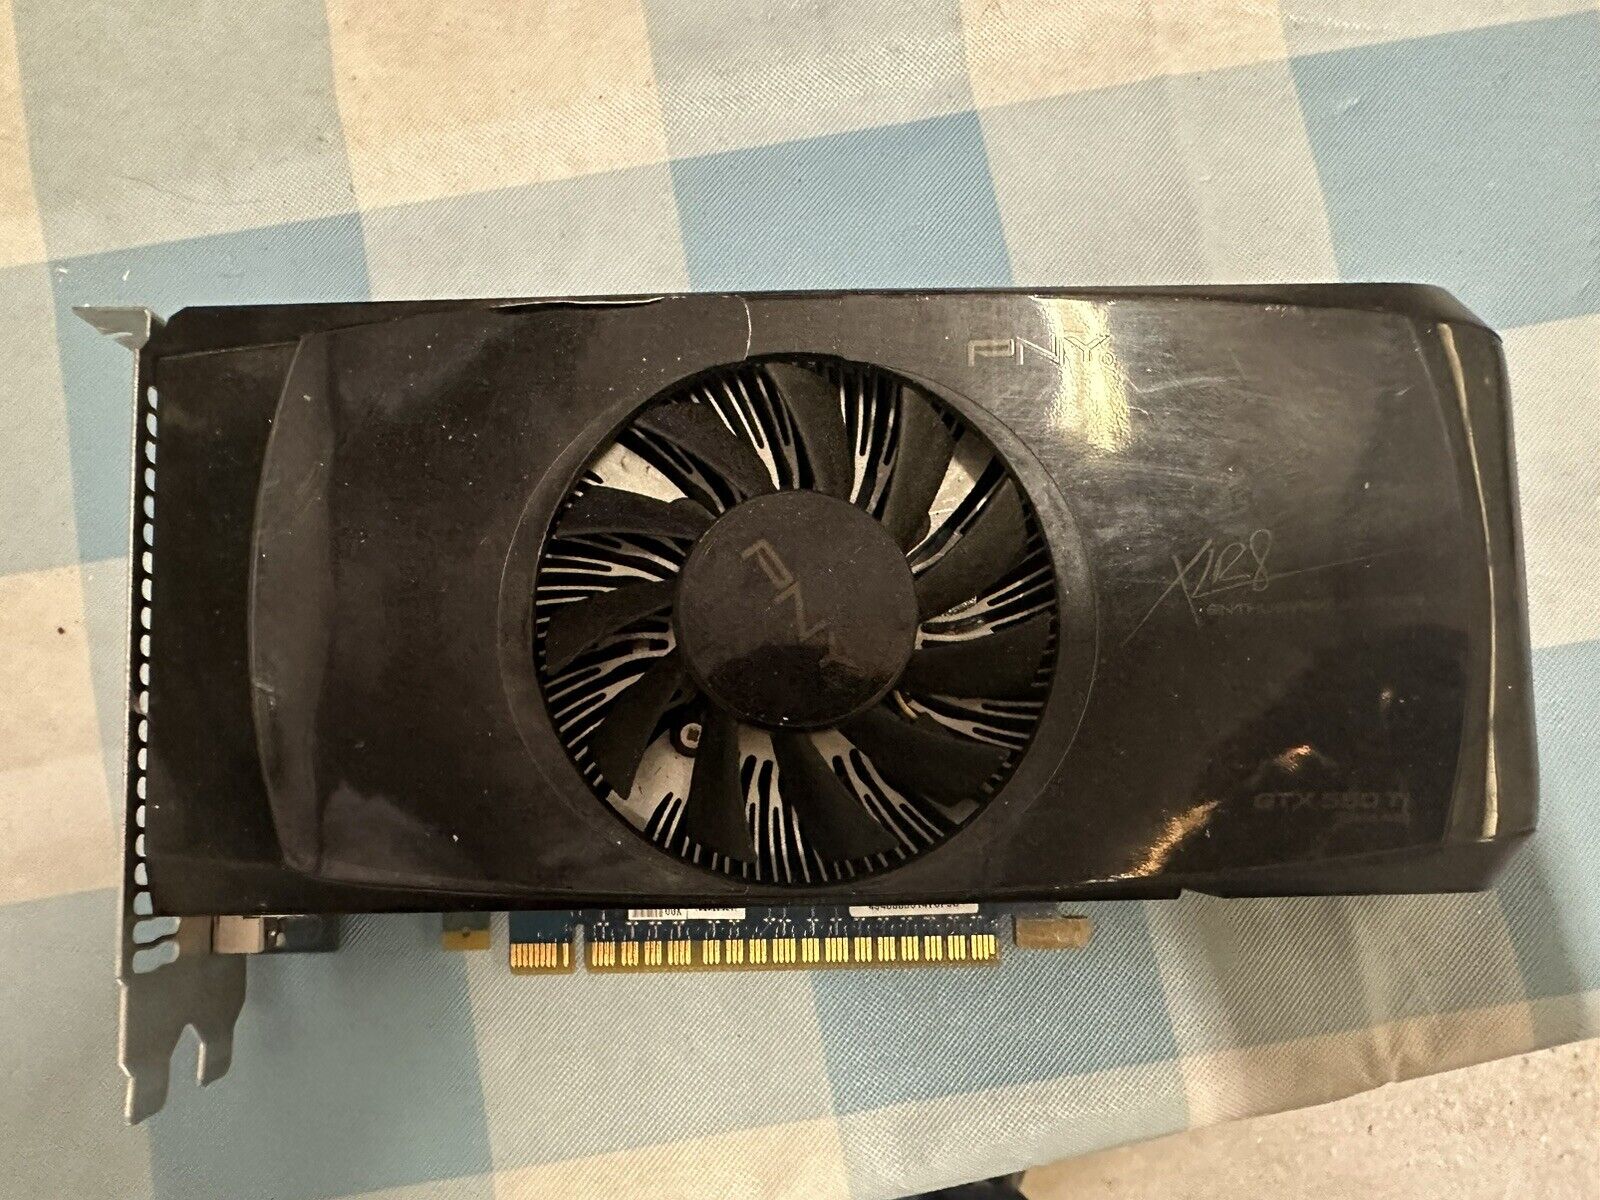 GTX 550TI ENTHUSIASTS EDITION (clearance sale)